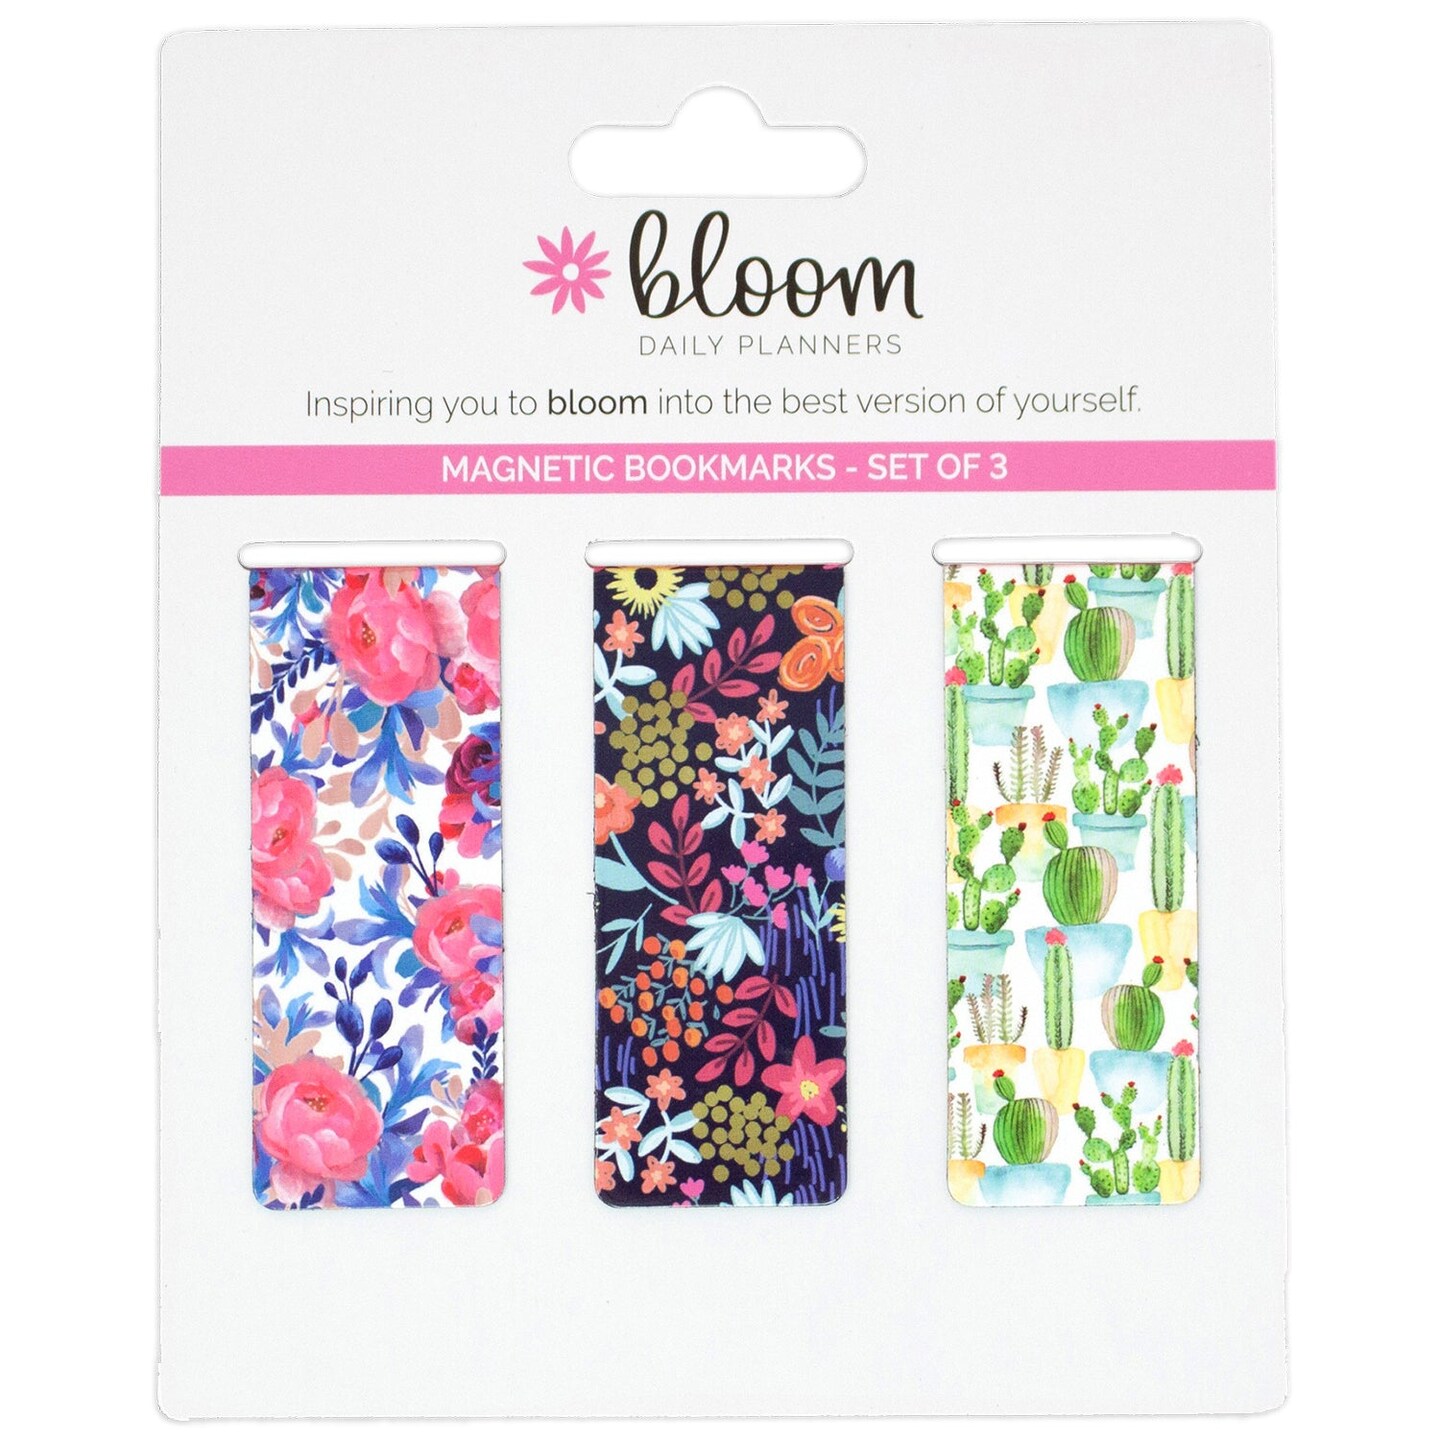 bloom daily planners Magnetic Bookmarks, Botanical, Set of 3